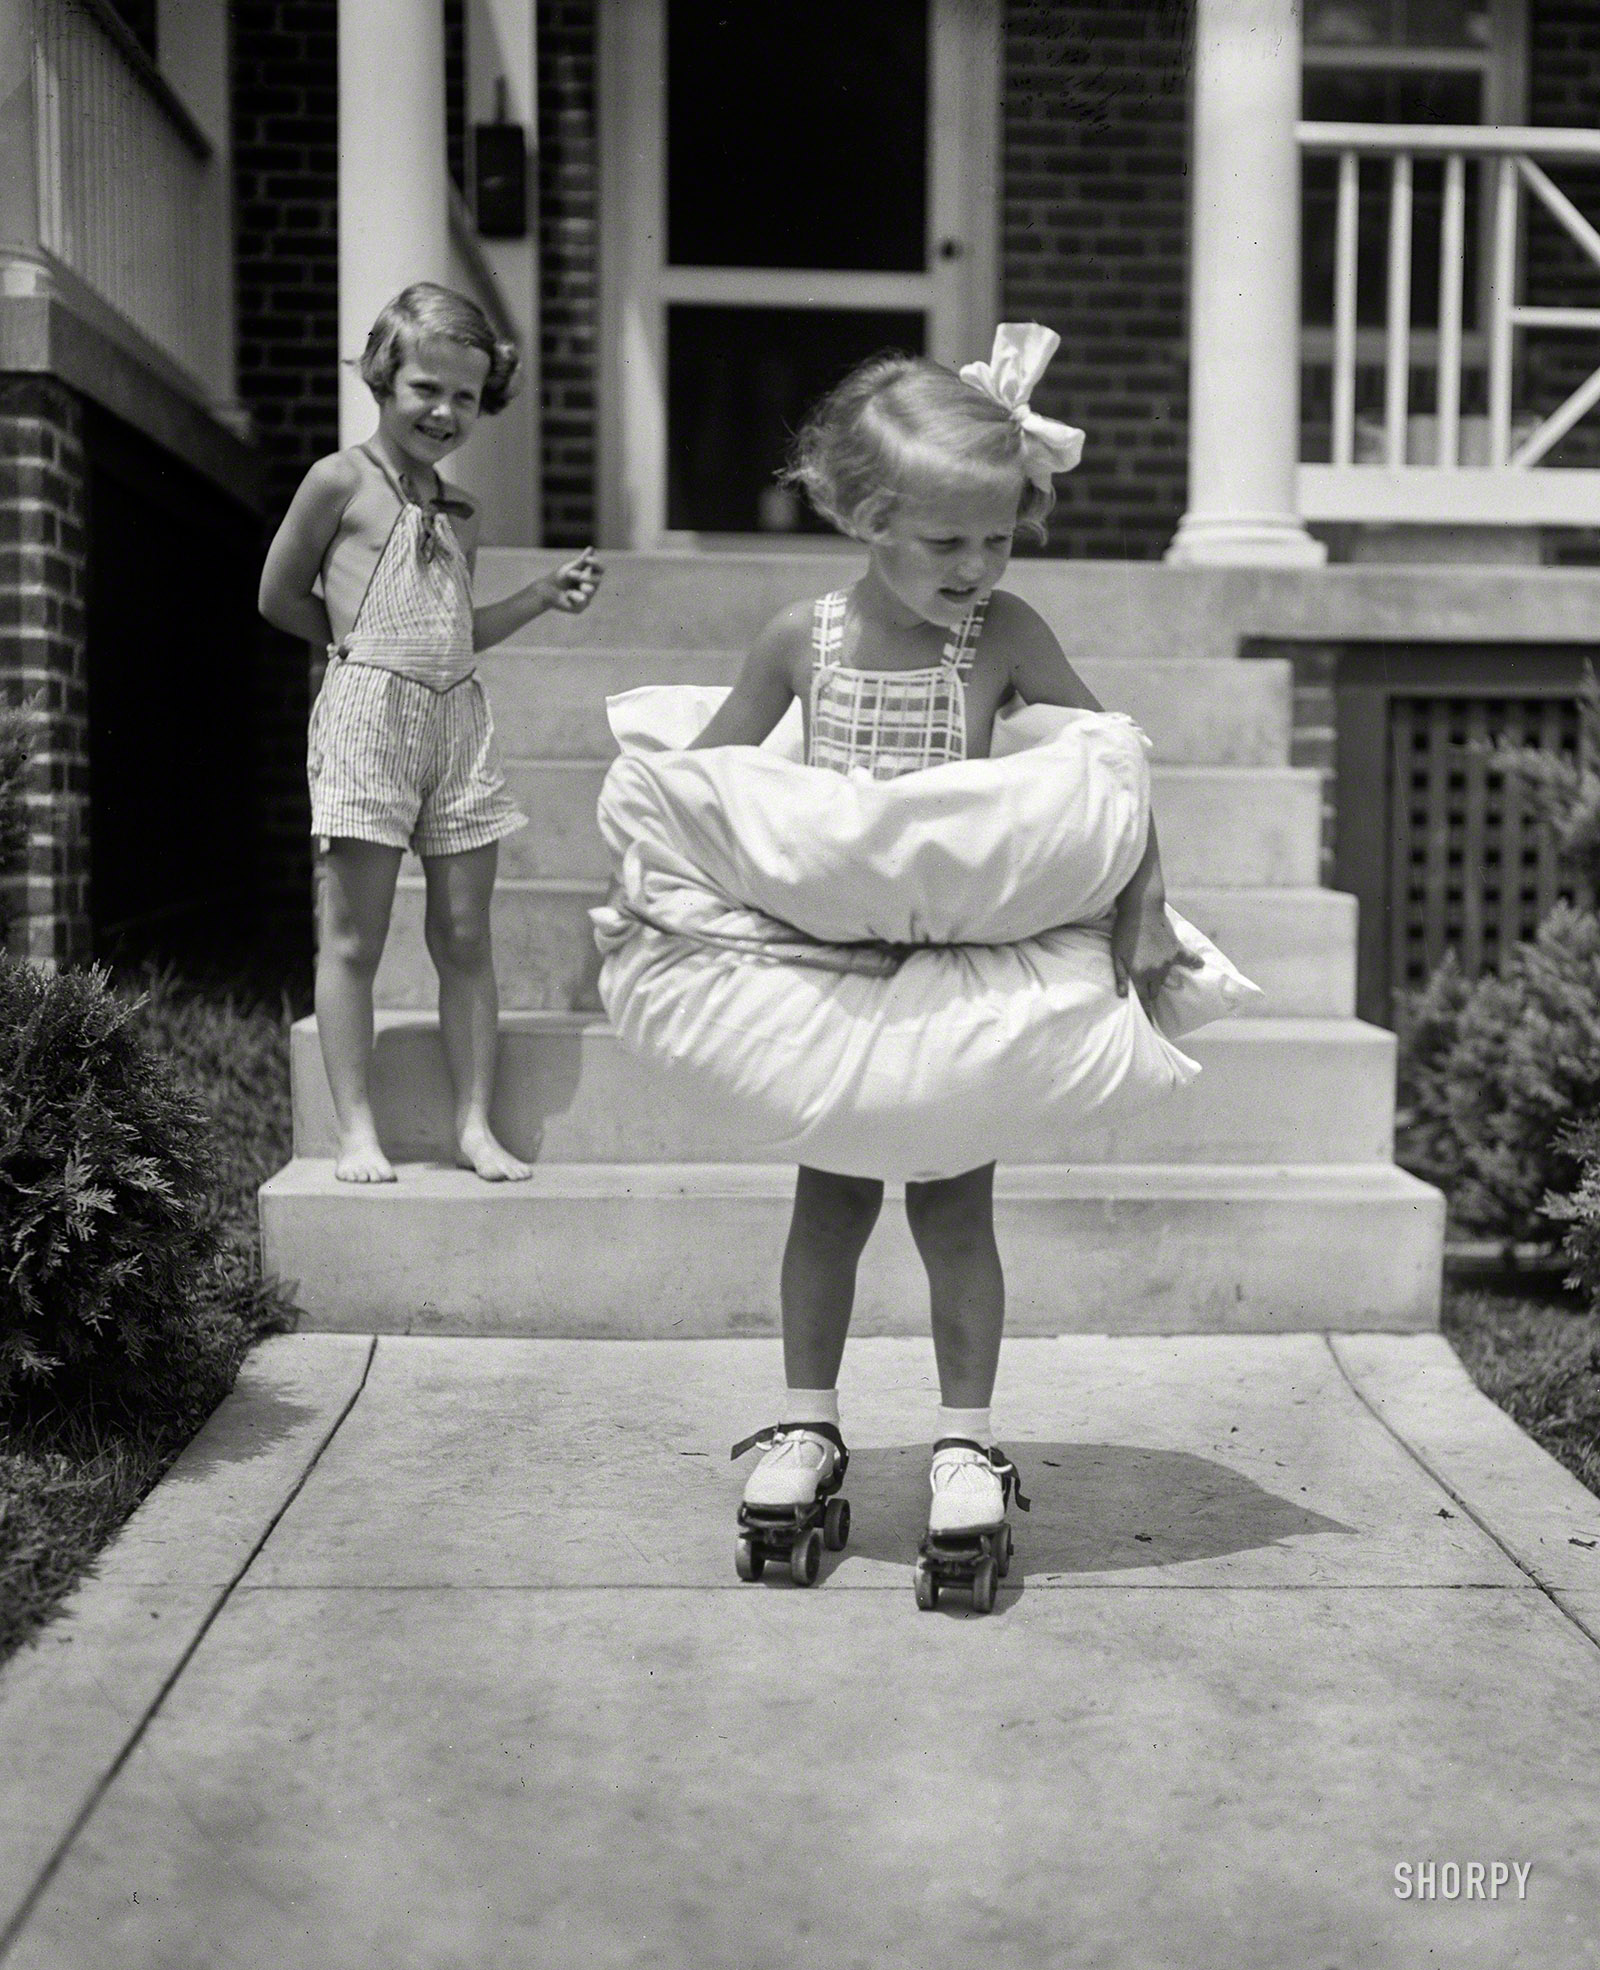 Aug. 8, 1936. Washington, D.C. "Safety first for this Miss. Equipped with bumpers fore and aft, 4-year-old Betty Buck is taking no unnecessary chances as she tries her first pair of roller skates." Harris & Ewing glass negative. View full size.